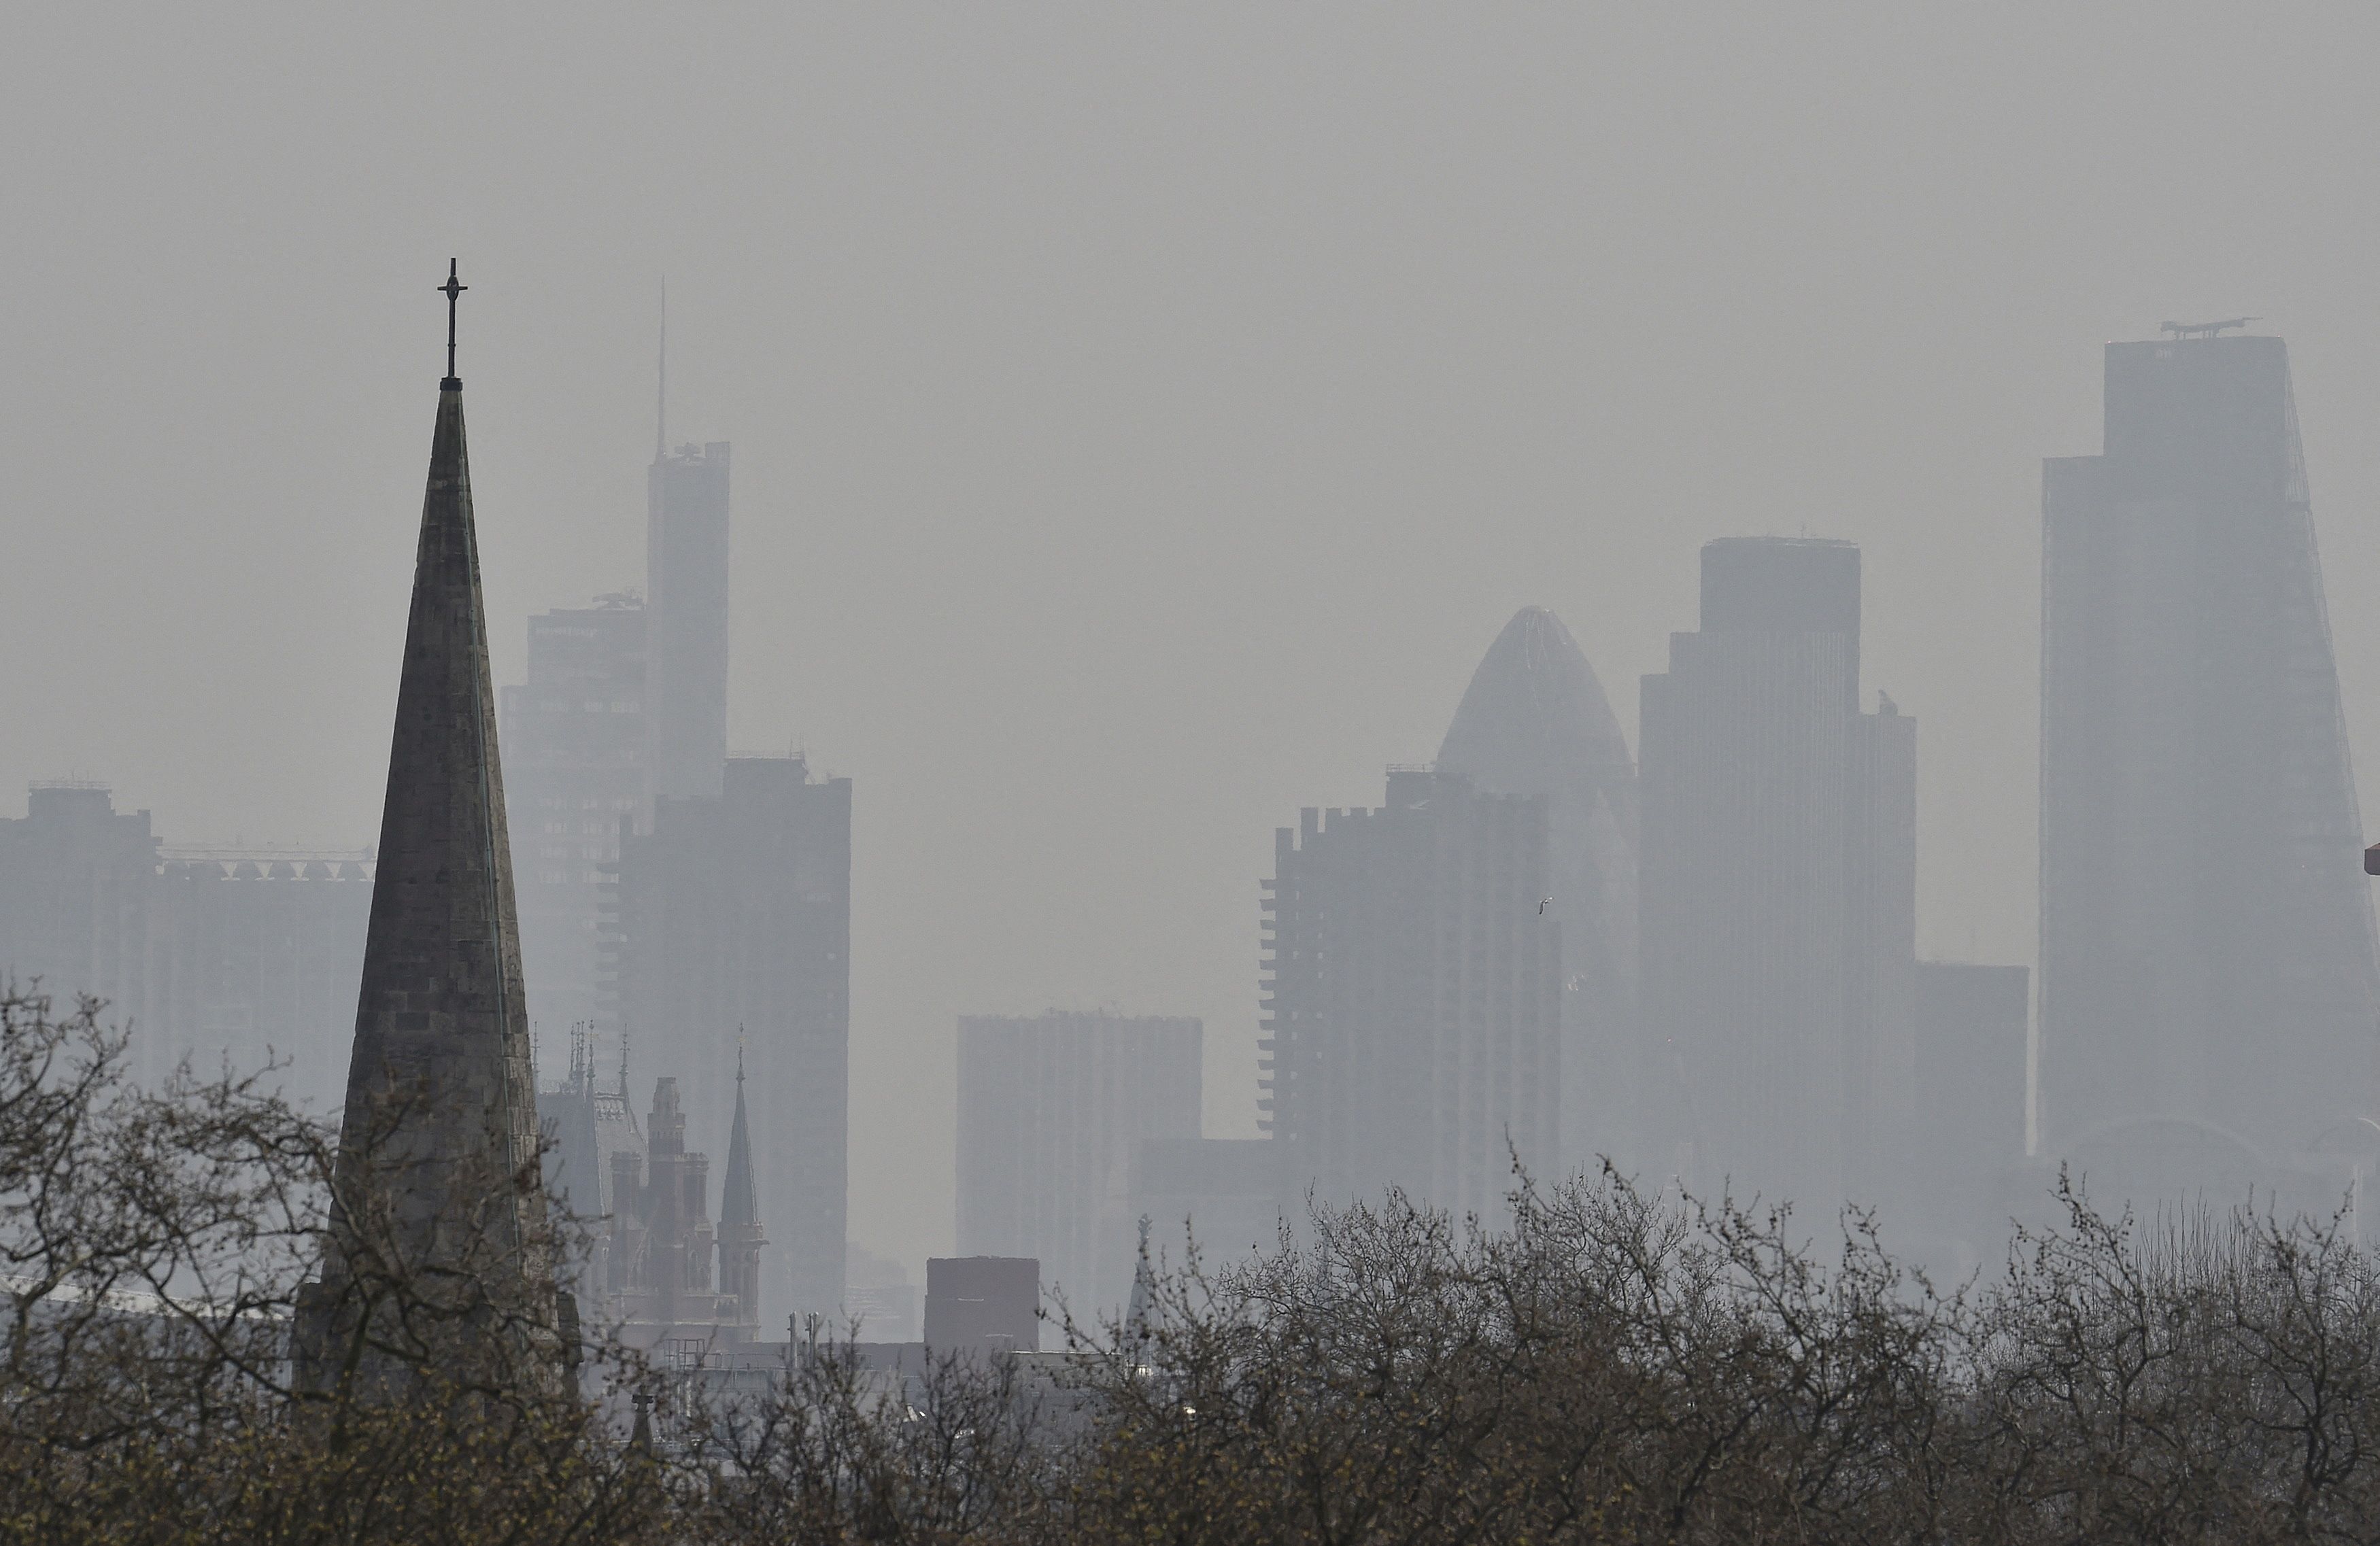 City of London financial district is seen from Primrose Hill as high air pollution obscures the skyline over London